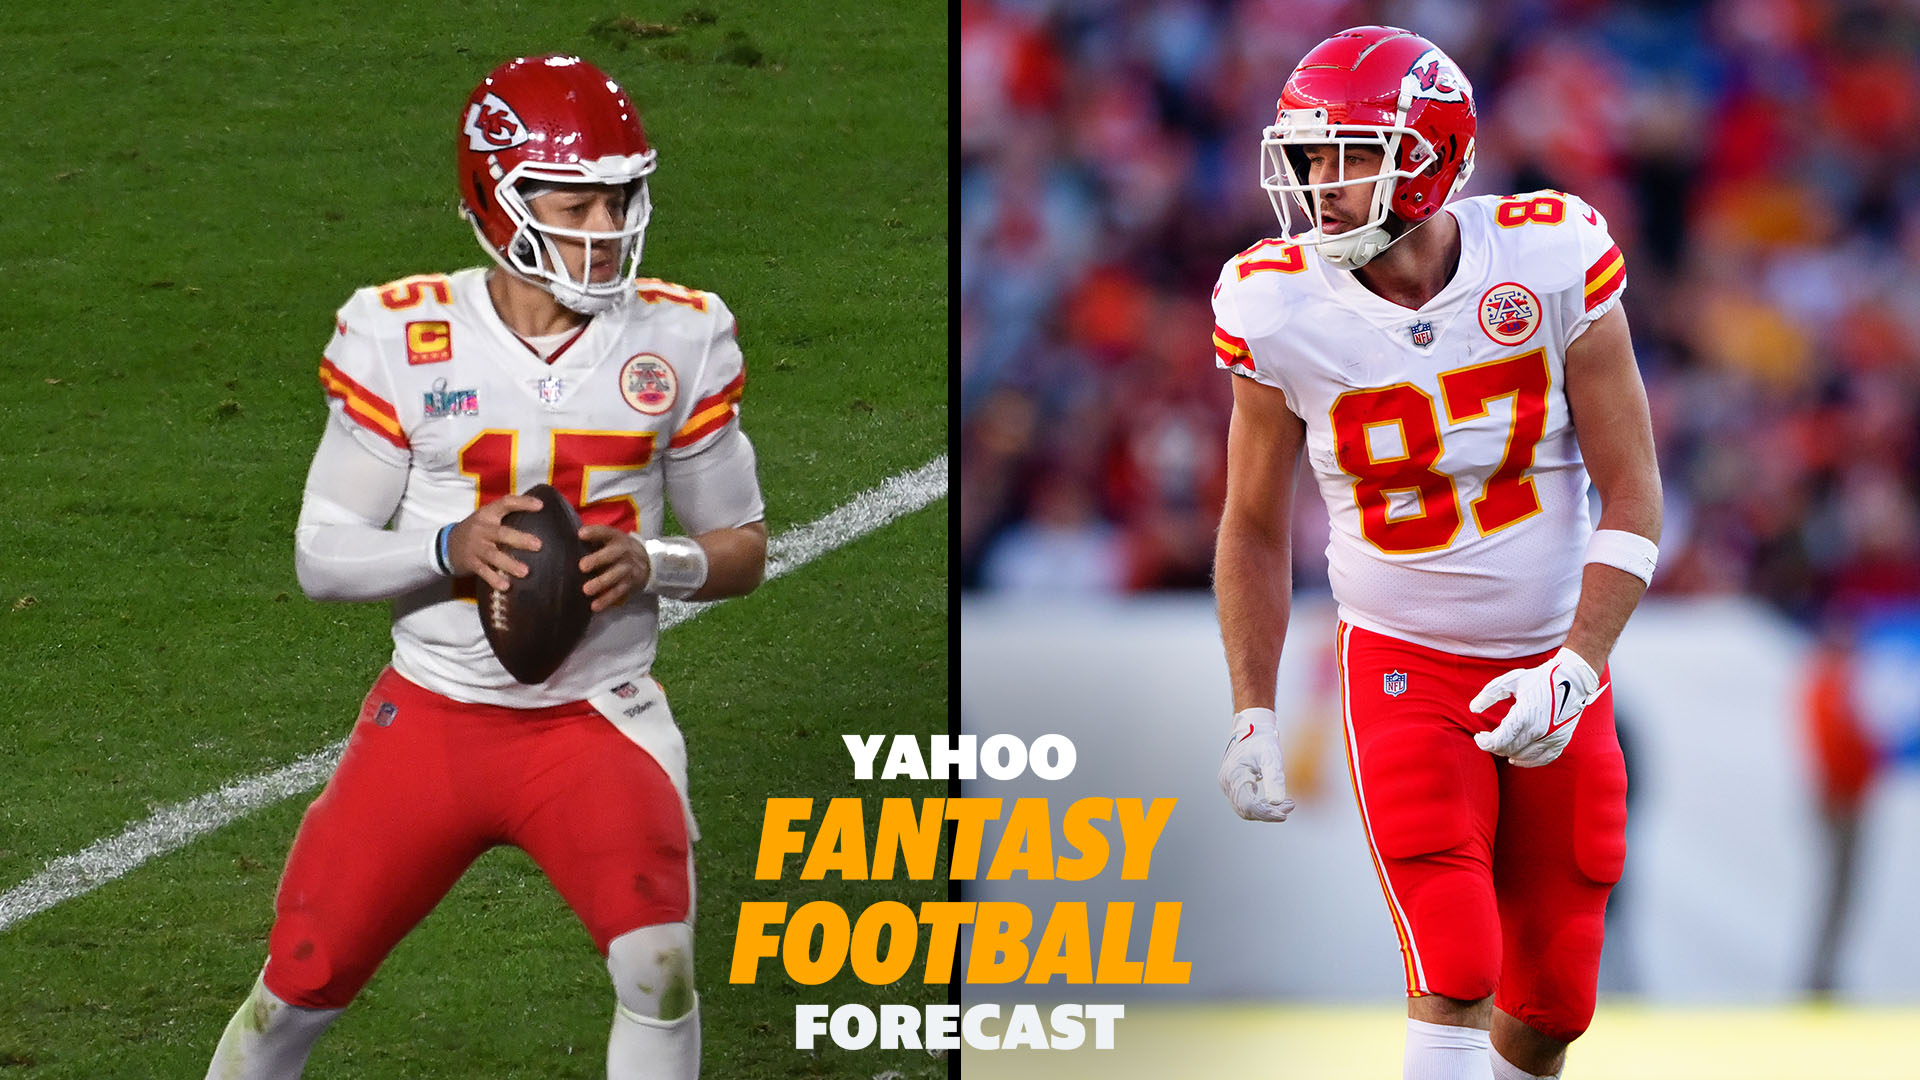 Who is the next best fantasy option in Kansas City?